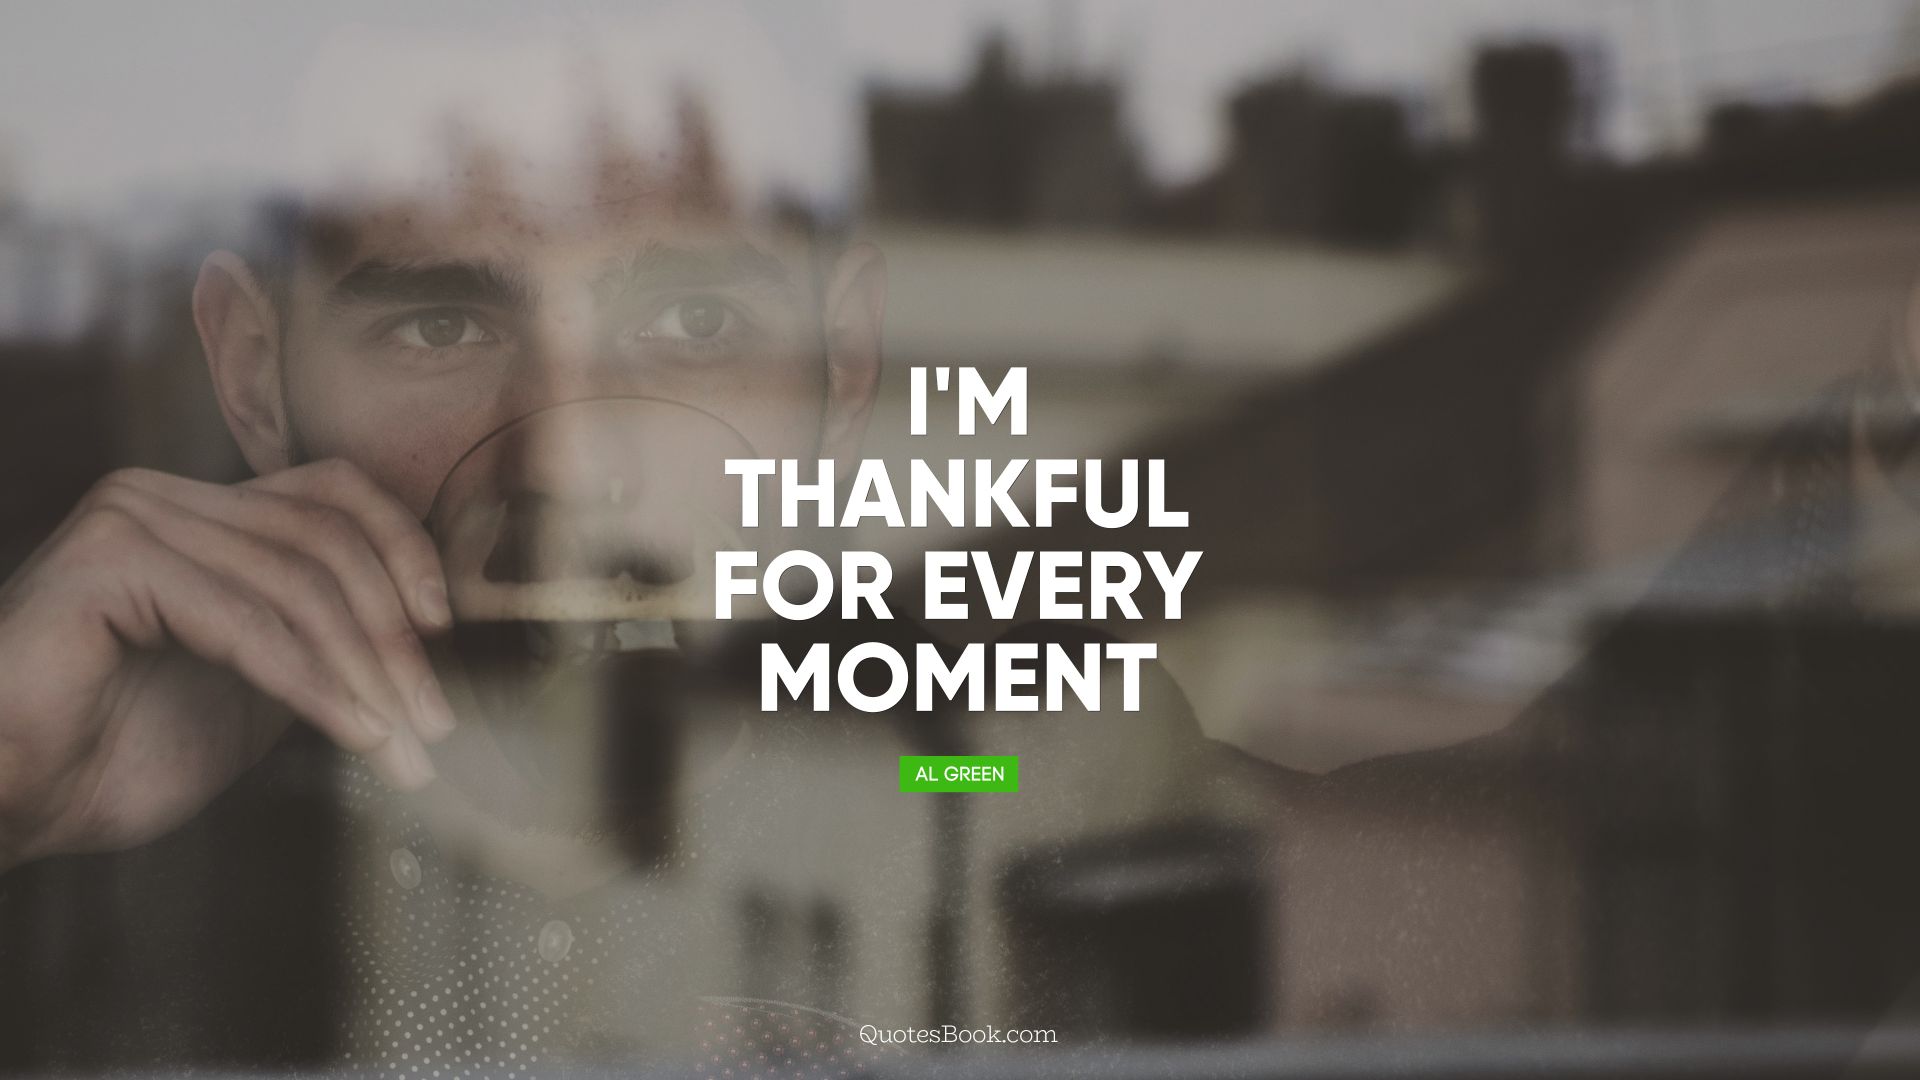 I'm thankful for every moment. - Quote by Al Green